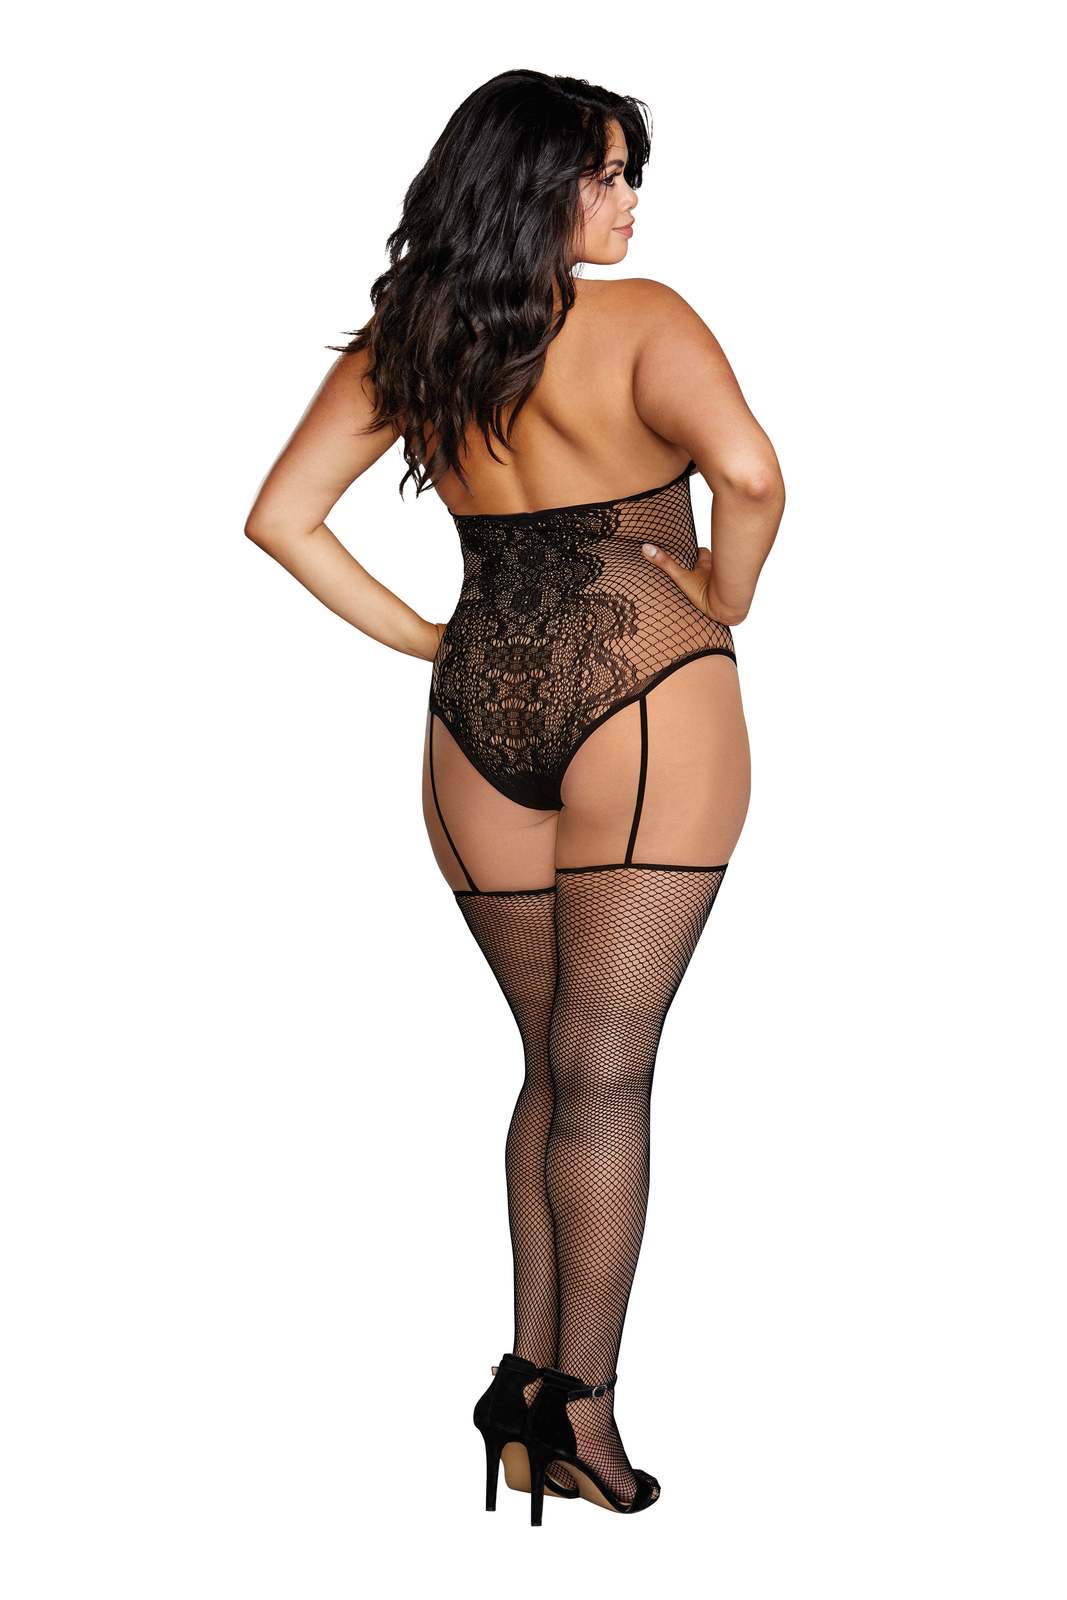 Primary image for Dreamgirl - Teddy Bodystocking